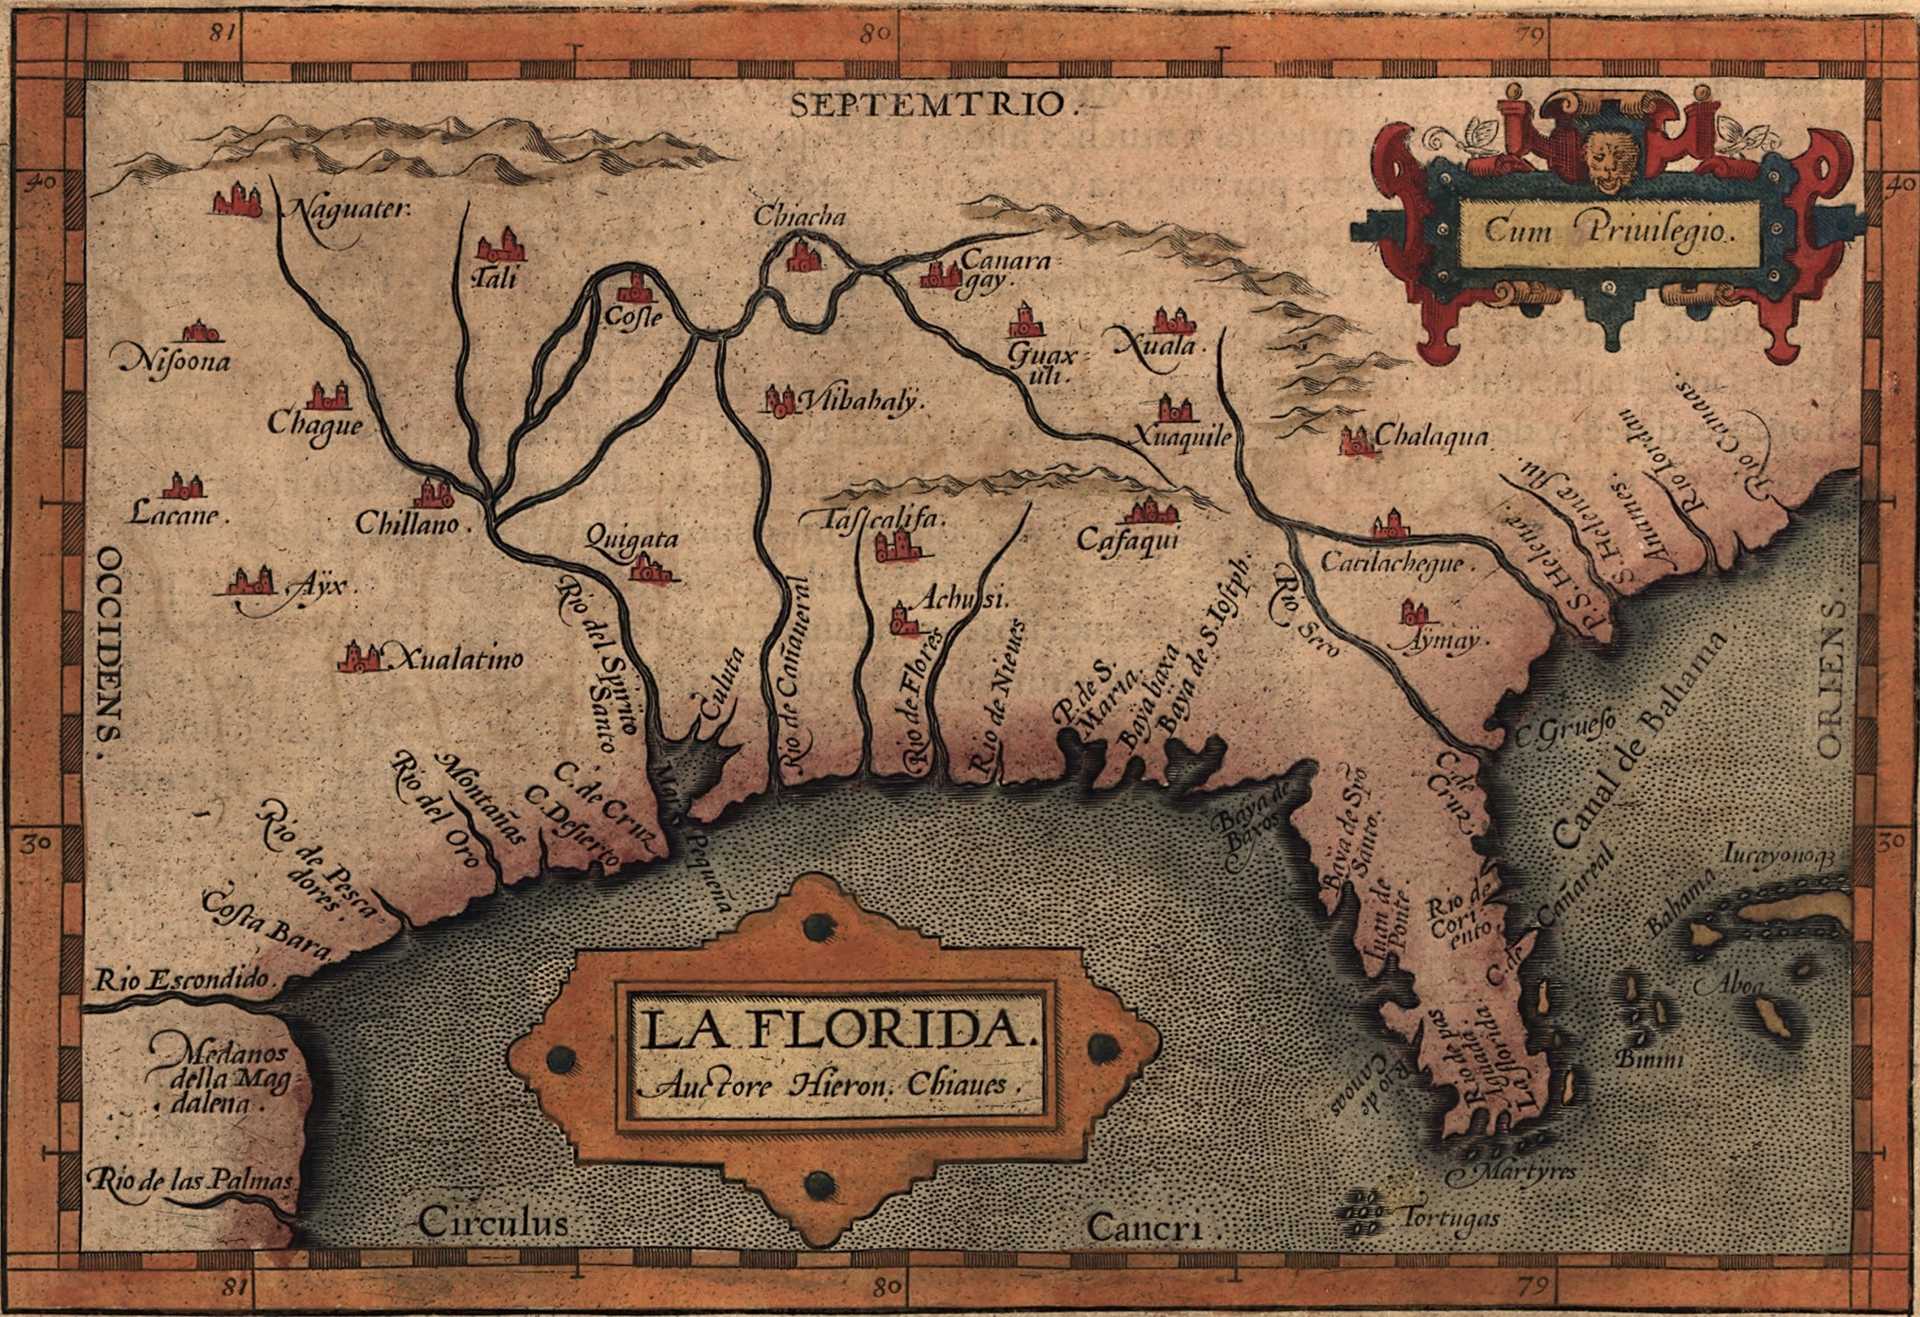 Map of the southeastern portion of the United States from present-day Florida north to the Chesapeake Bay—an area known as "La Florida" to the Spanish in the 1600s.